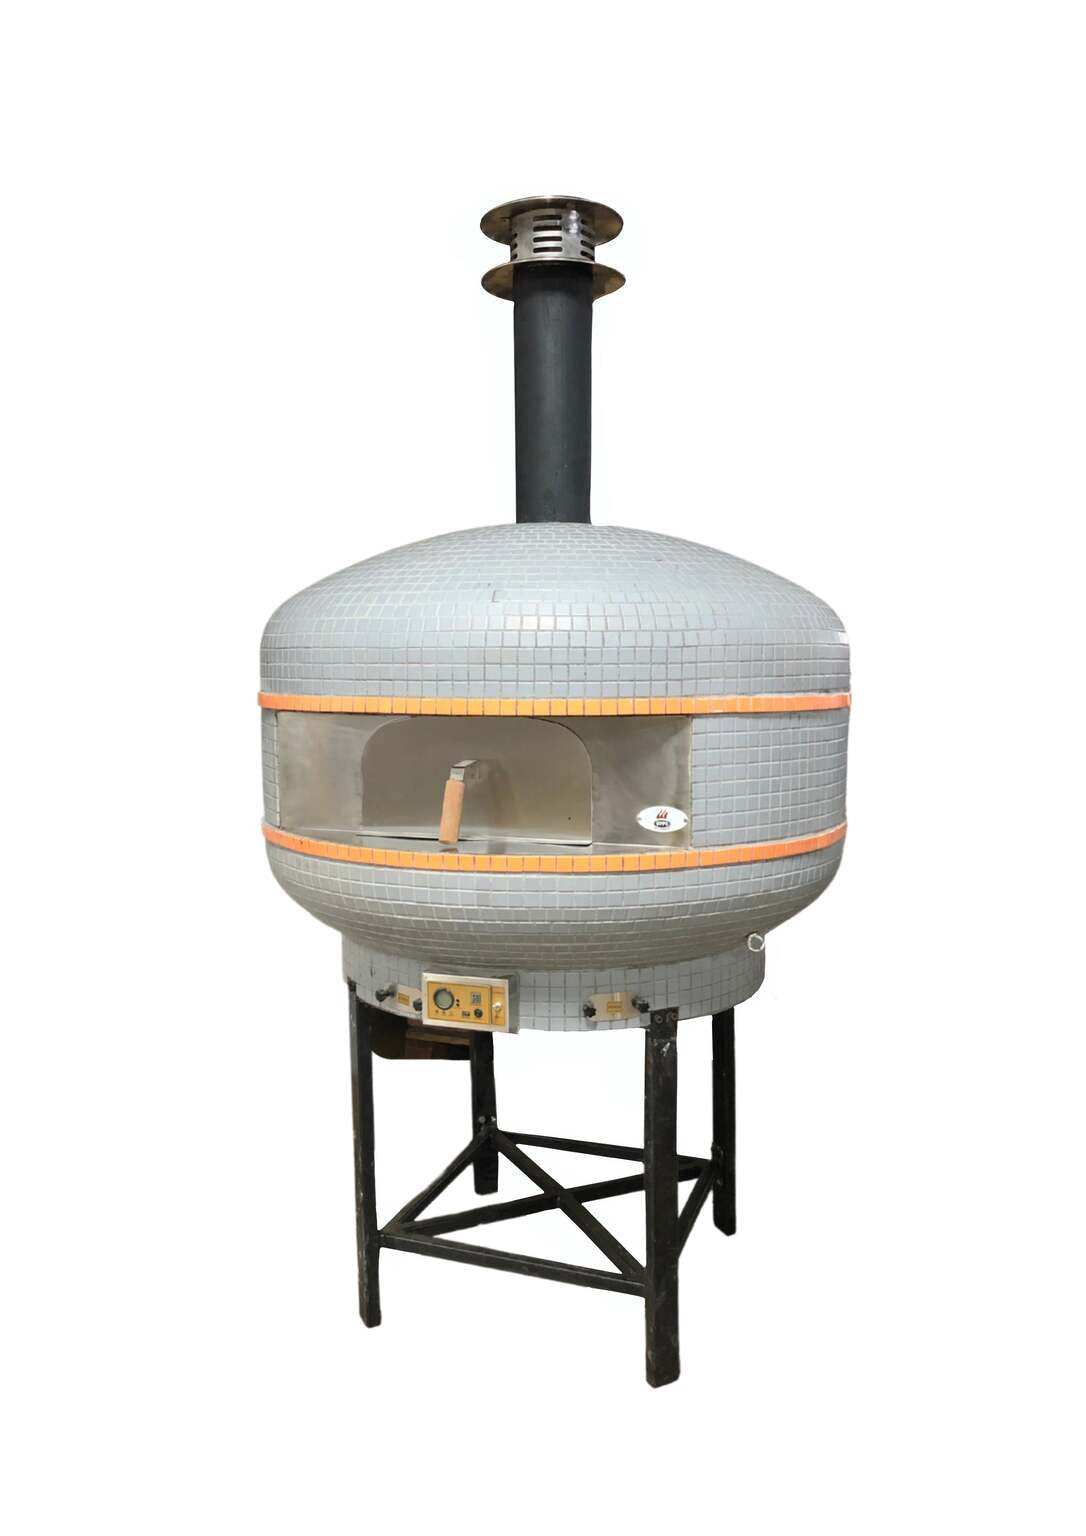 WPPO Professional Digital Wood Fired Oven w/ Convection Fan-Novel Home